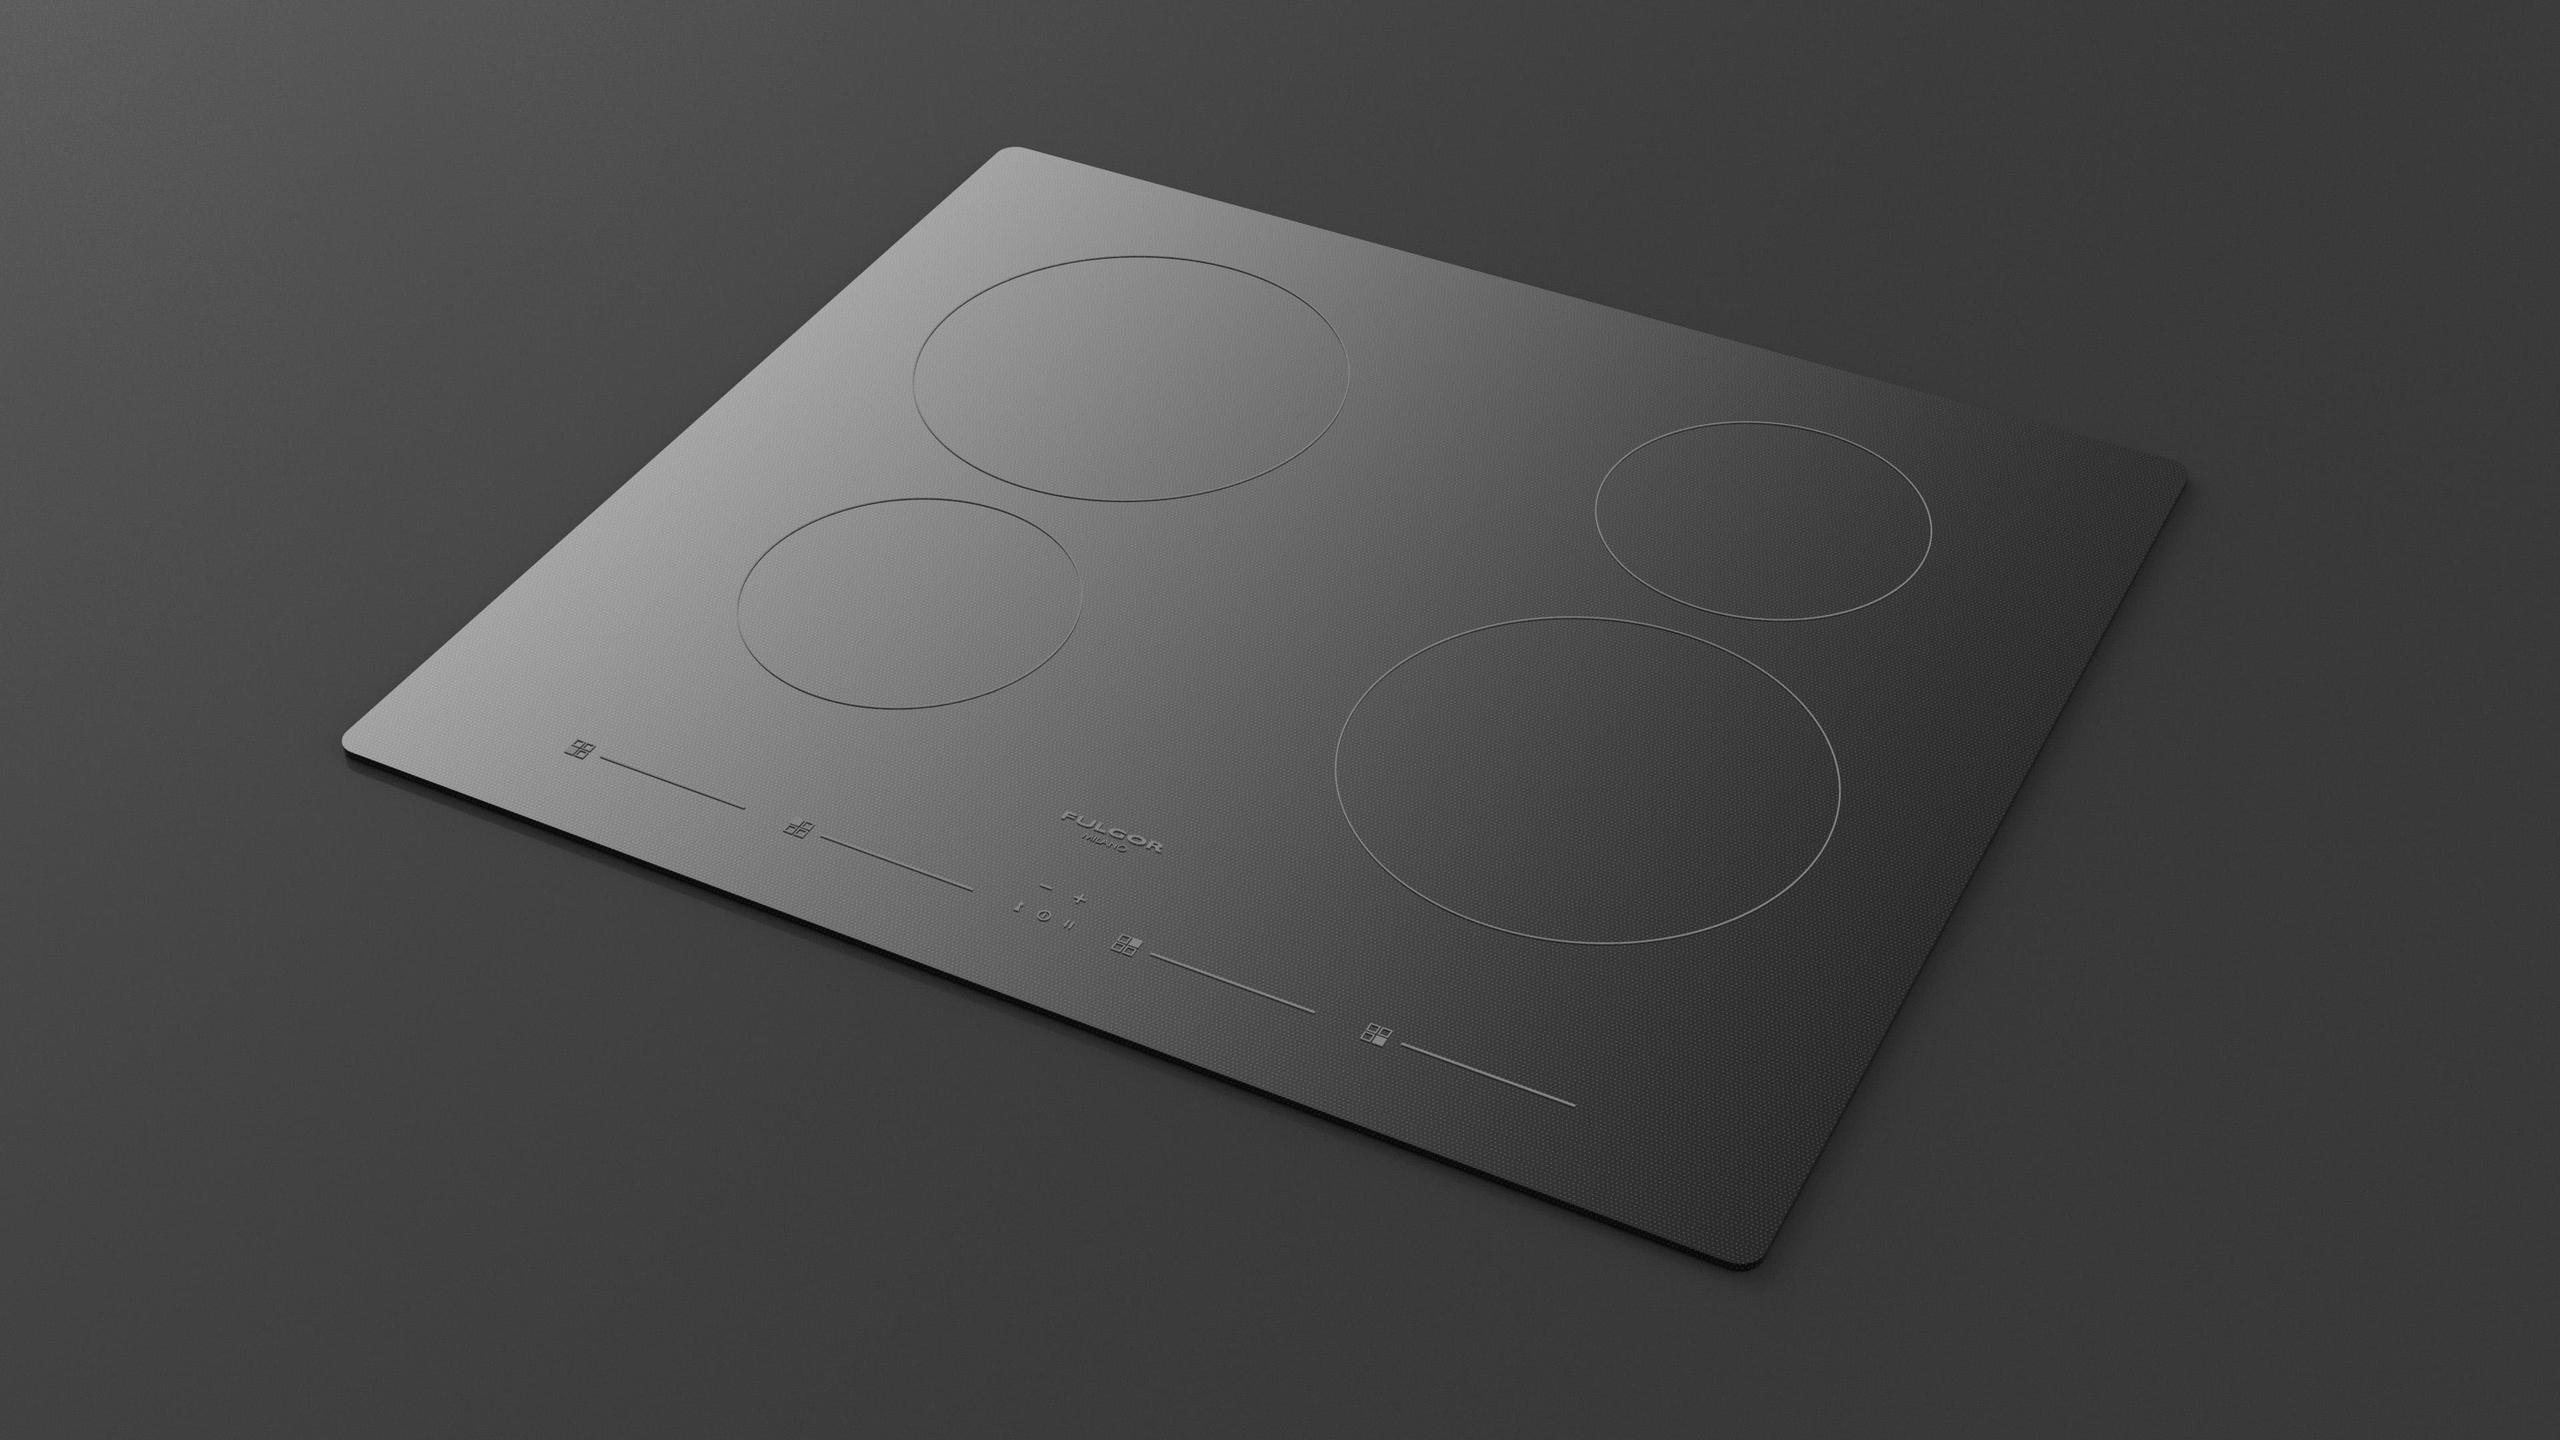 24 INDUCTION COOKTOP